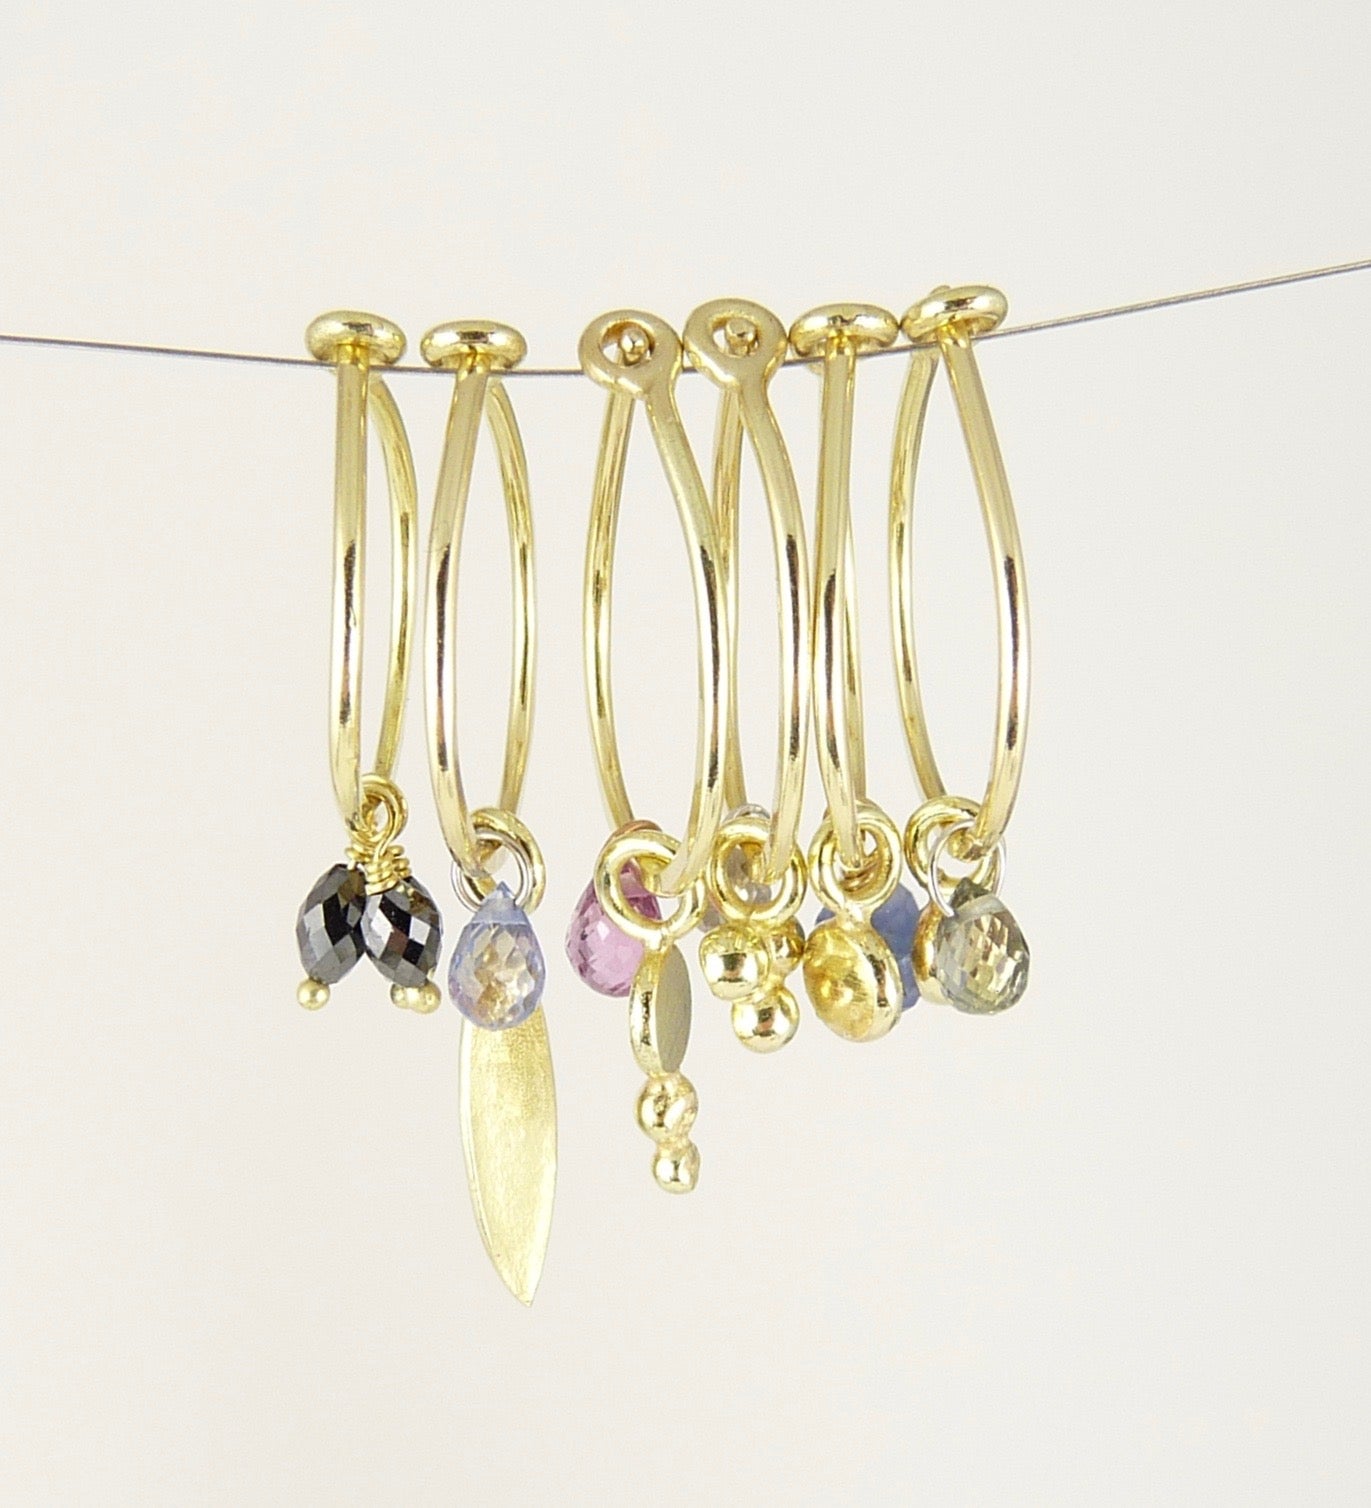 18ct Gold hoop earring with leaf and blue sapphire briolette